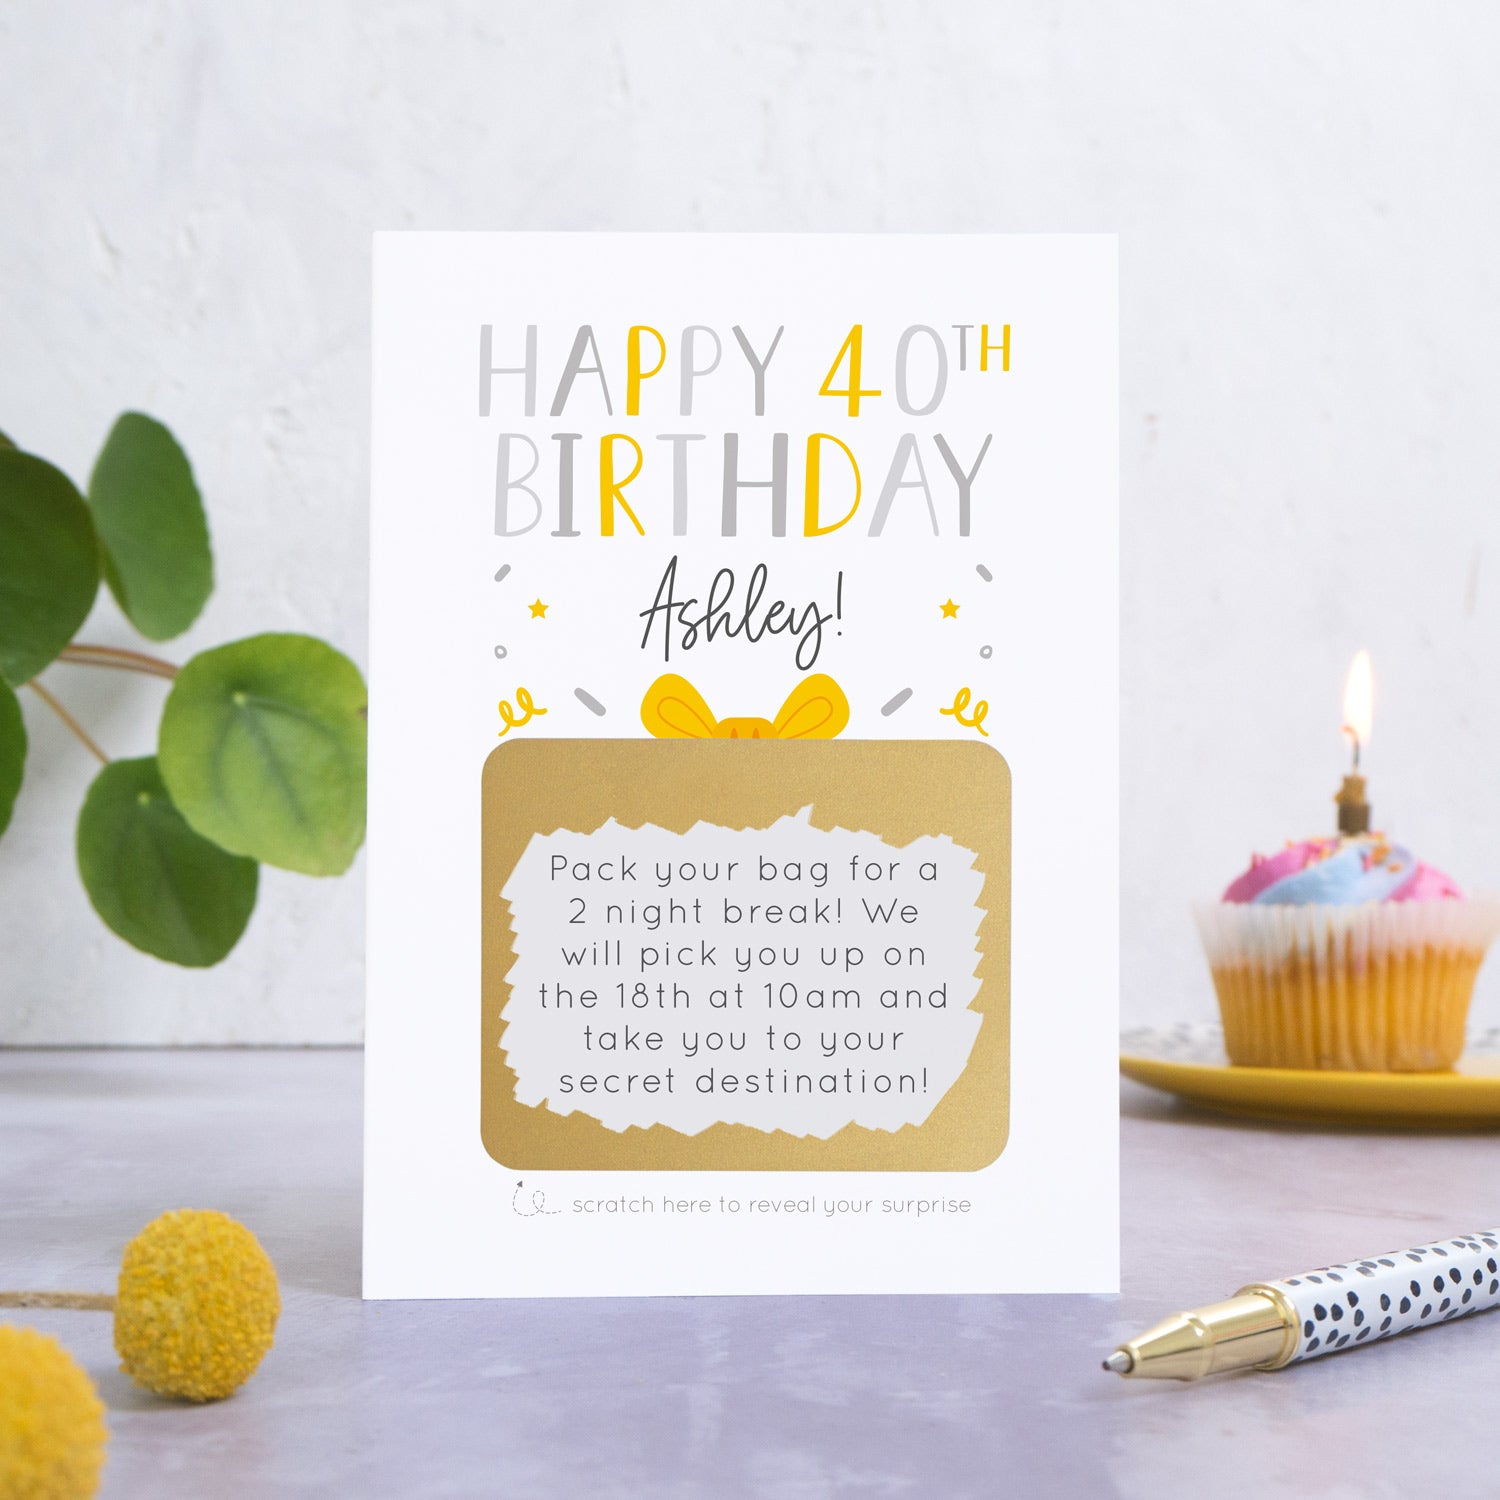 A personalised happy 40th birthday scratch card in grey that has been photographed on a white and grey background. There is foliage and yellow flowers on the left and a cupcake and a pen to the right. The card features the recipients name and a scratch panel that has been scratched off revealing a personalised message.